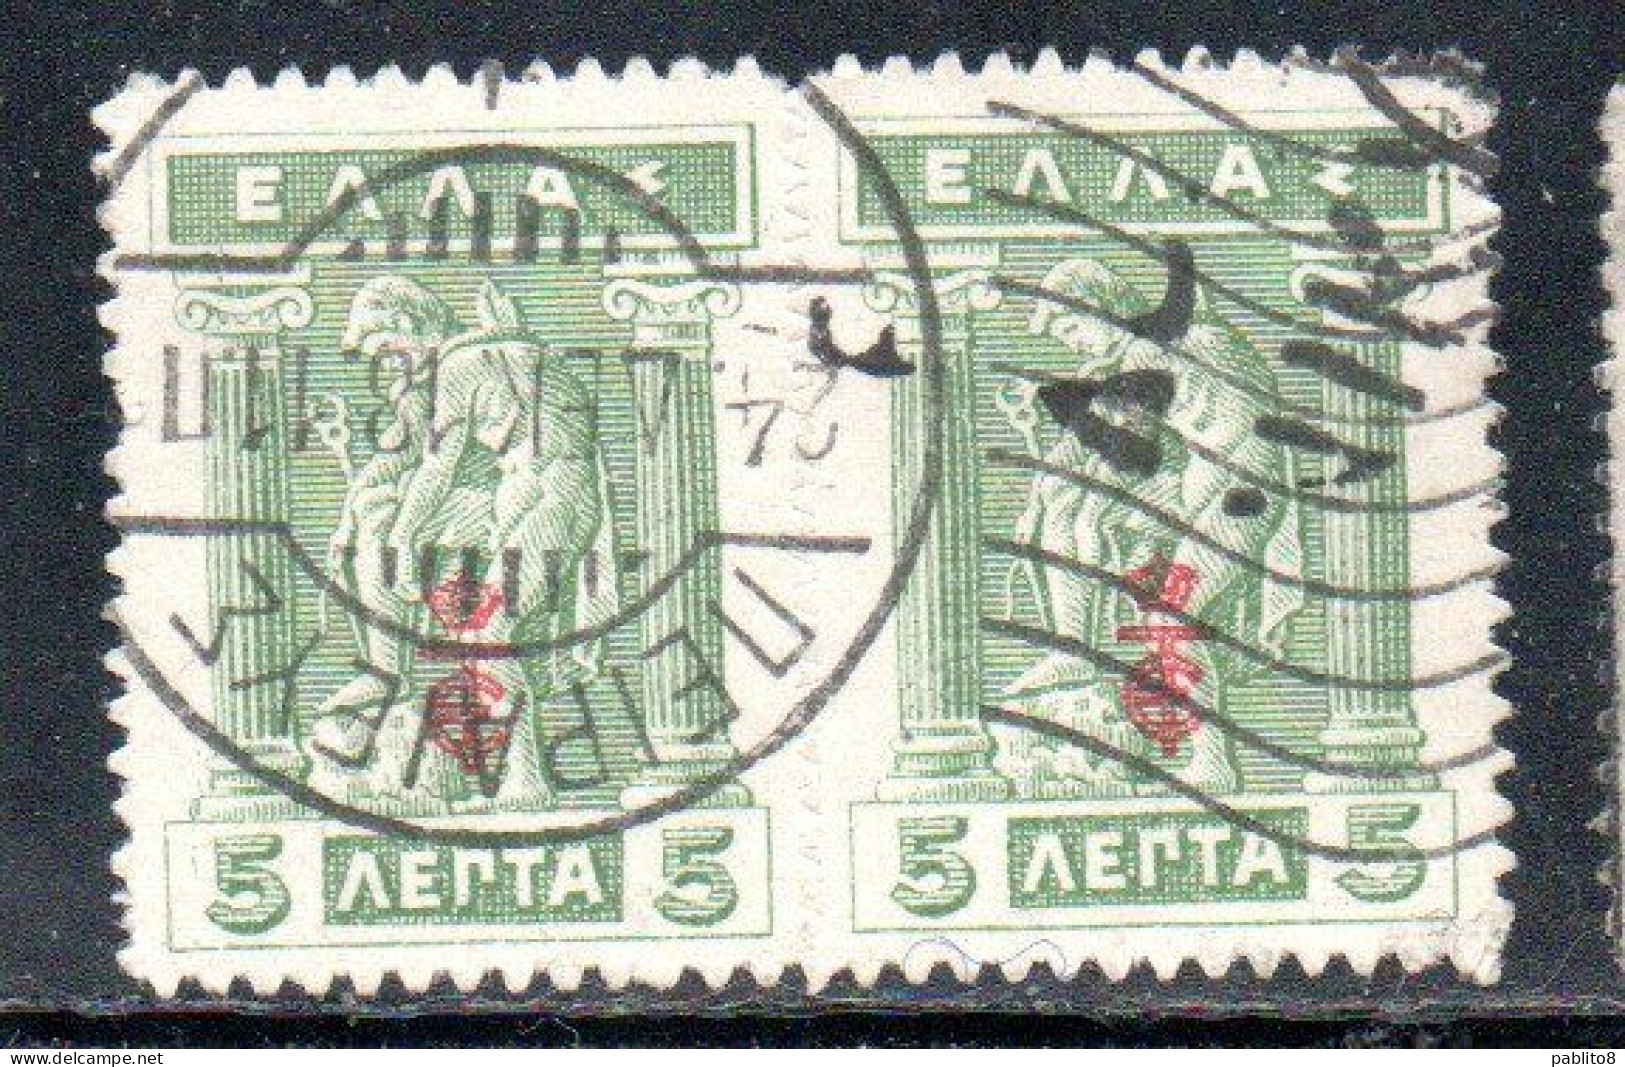 GREECE GRECIA ELLAS 1916 OVERPRINTED IN RED HERMES MERCURY MERCURIO DONNING SANDALS 5l USED USATO OBLITERE' - Used Stamps